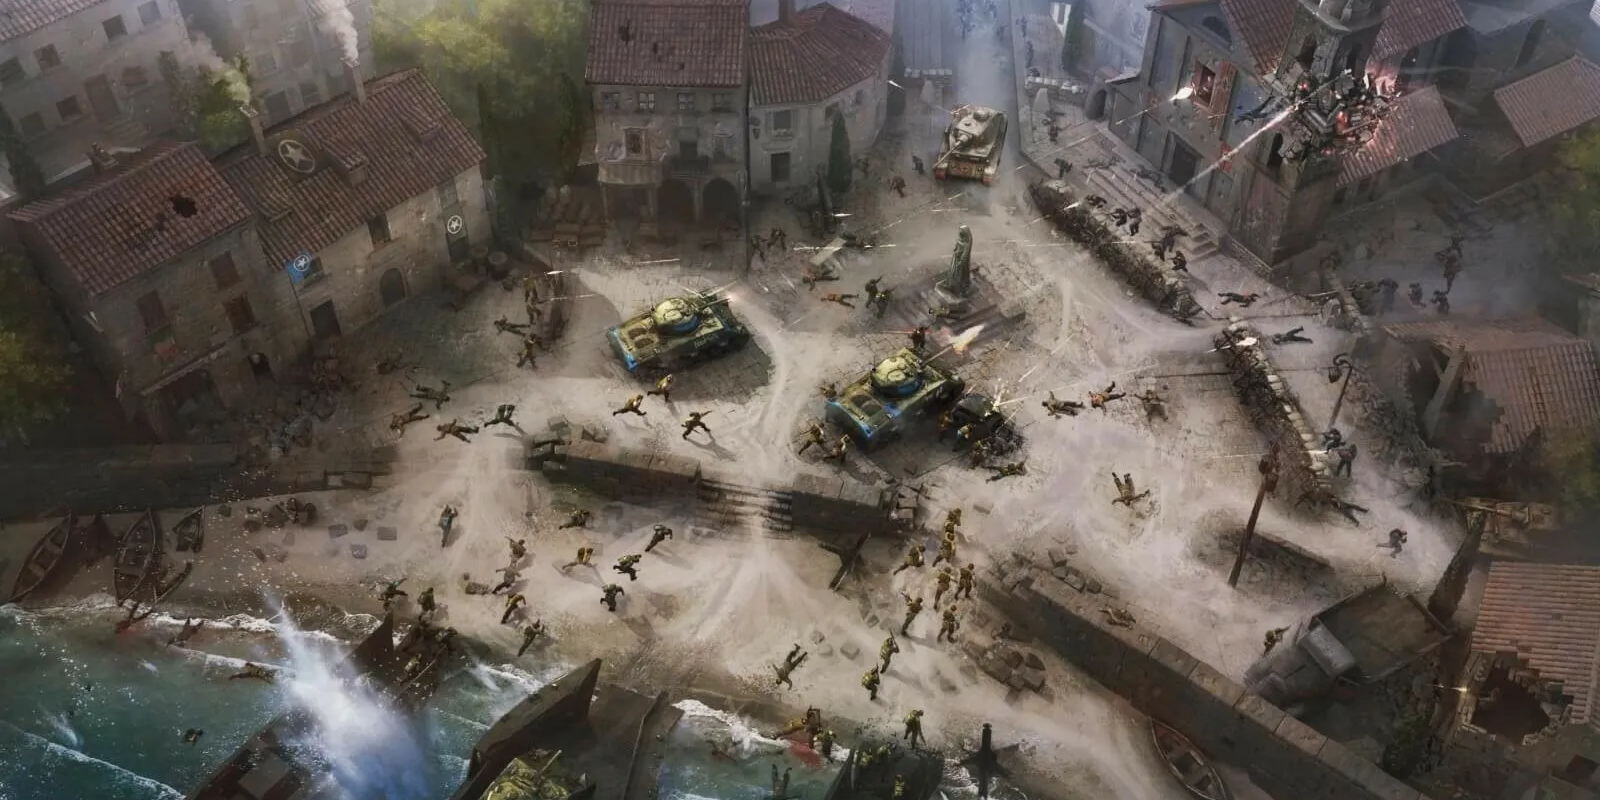 gameplay screenshot from company of heroes 3